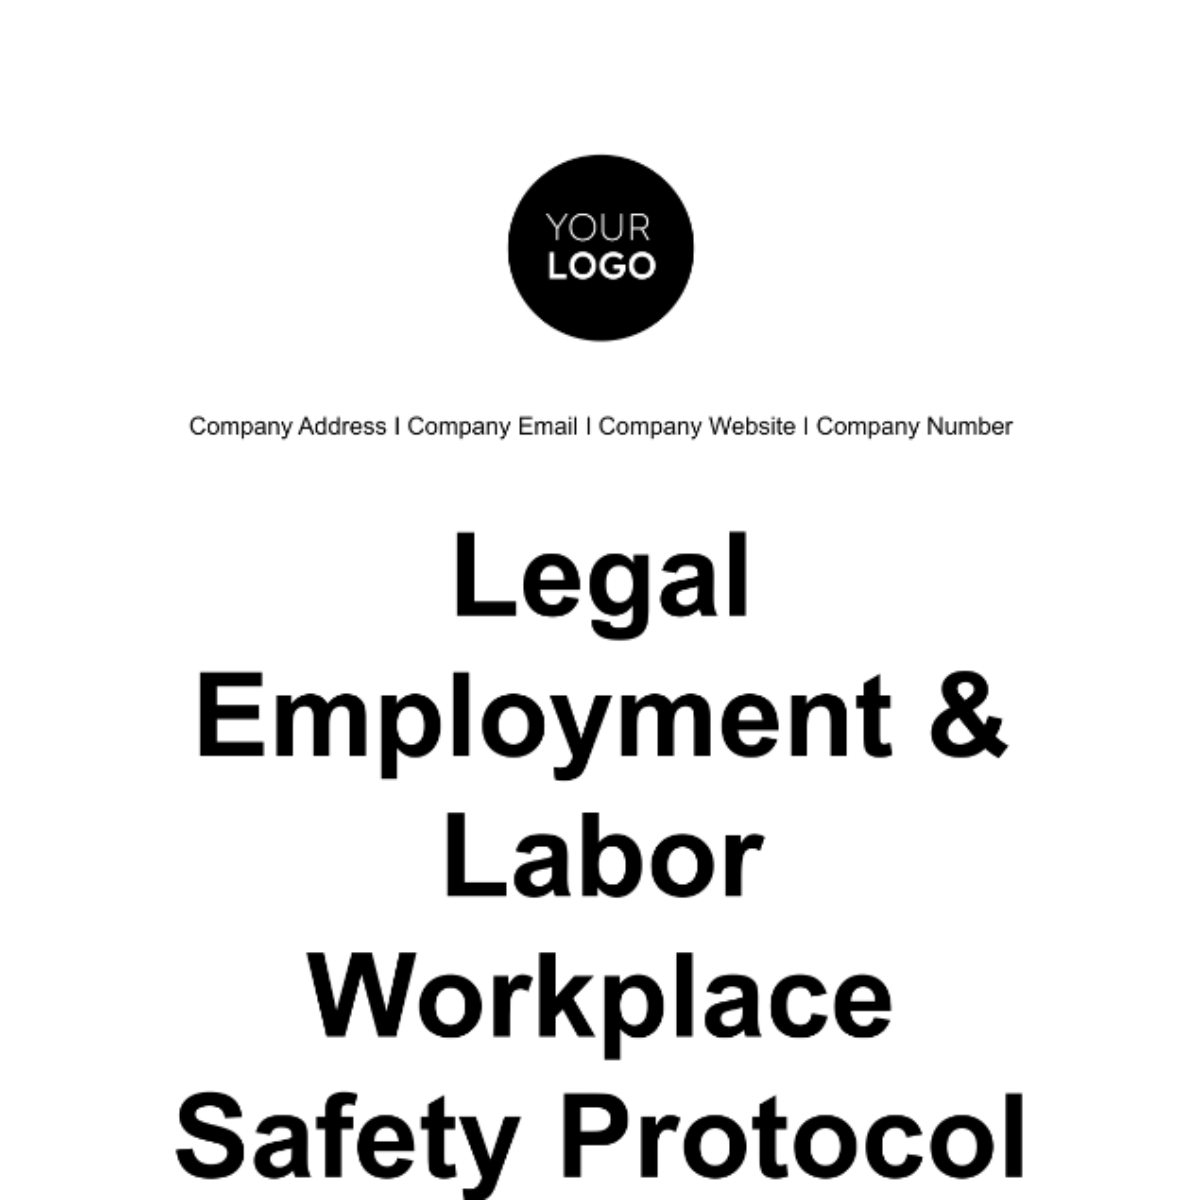 Free Legal Employment & Labor Workplace Safety Protocol Template